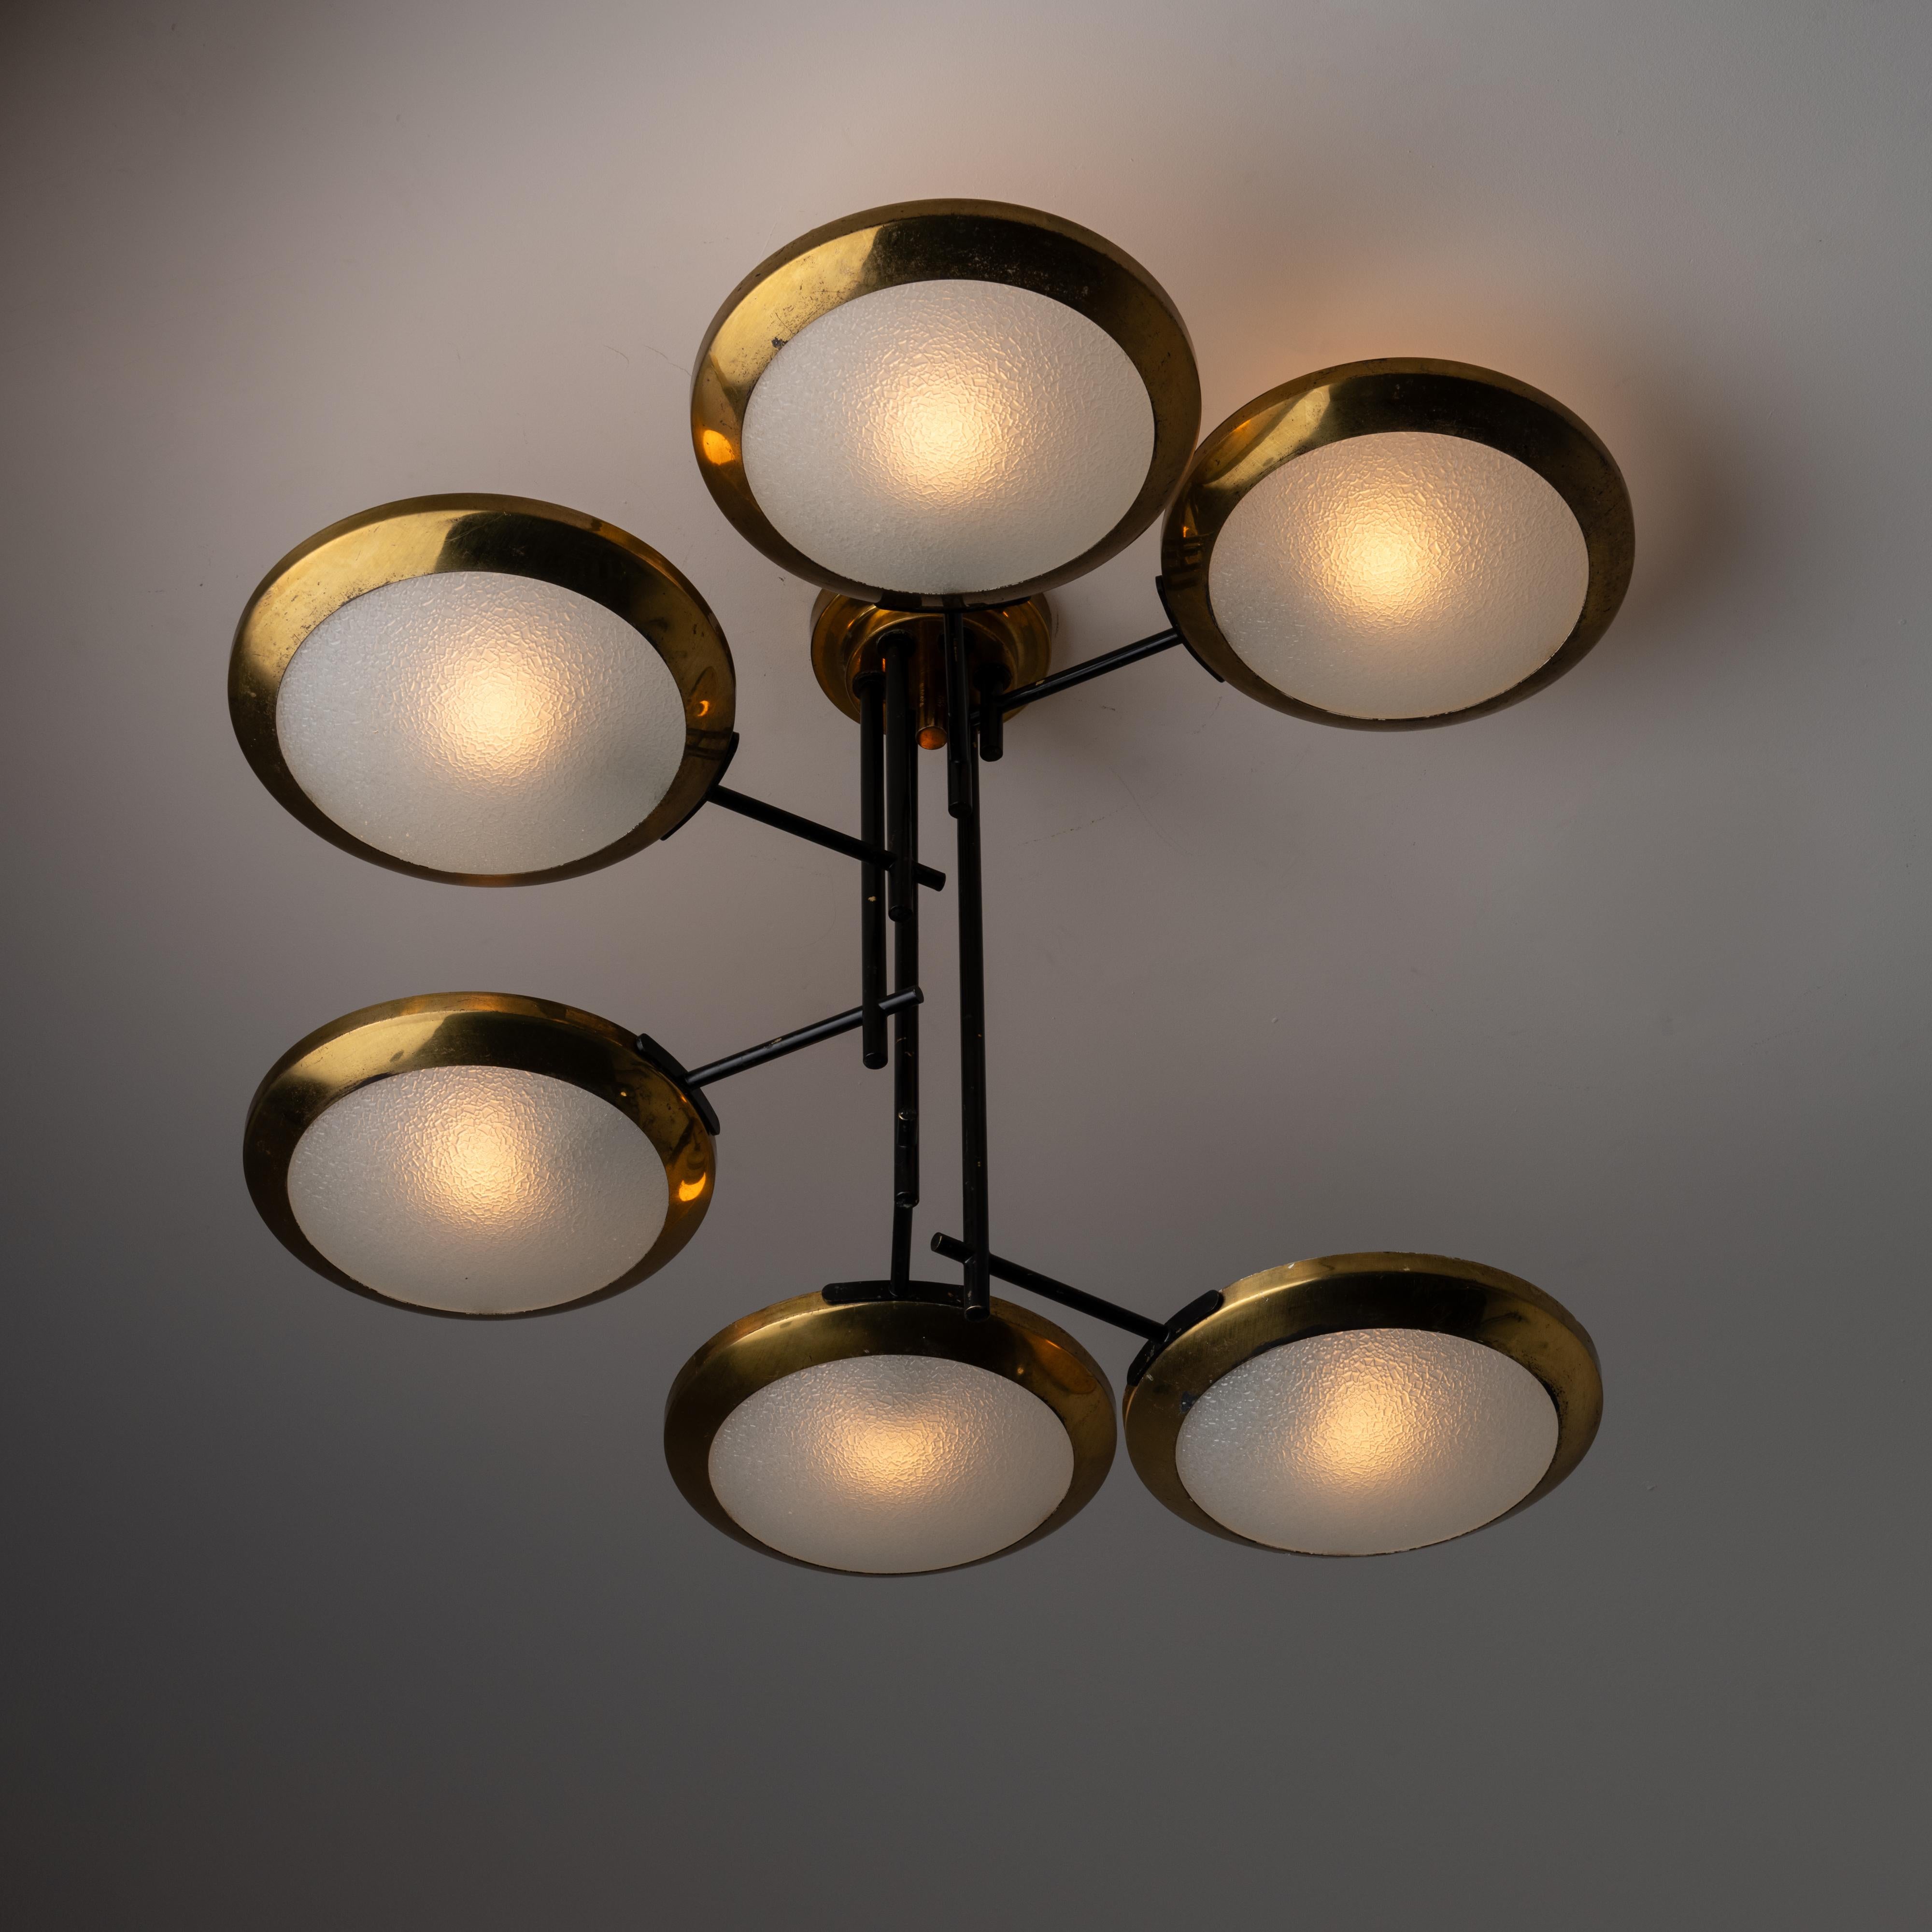 Ceiling Light by Stilnovo. Designed and manufactured in Italy, circa the 1950s. Six shade chandelier consisting of circular rings cascading down a multi stem. Each ring is made up of polished brass, enameled steel and a textured glass diffuser. Each